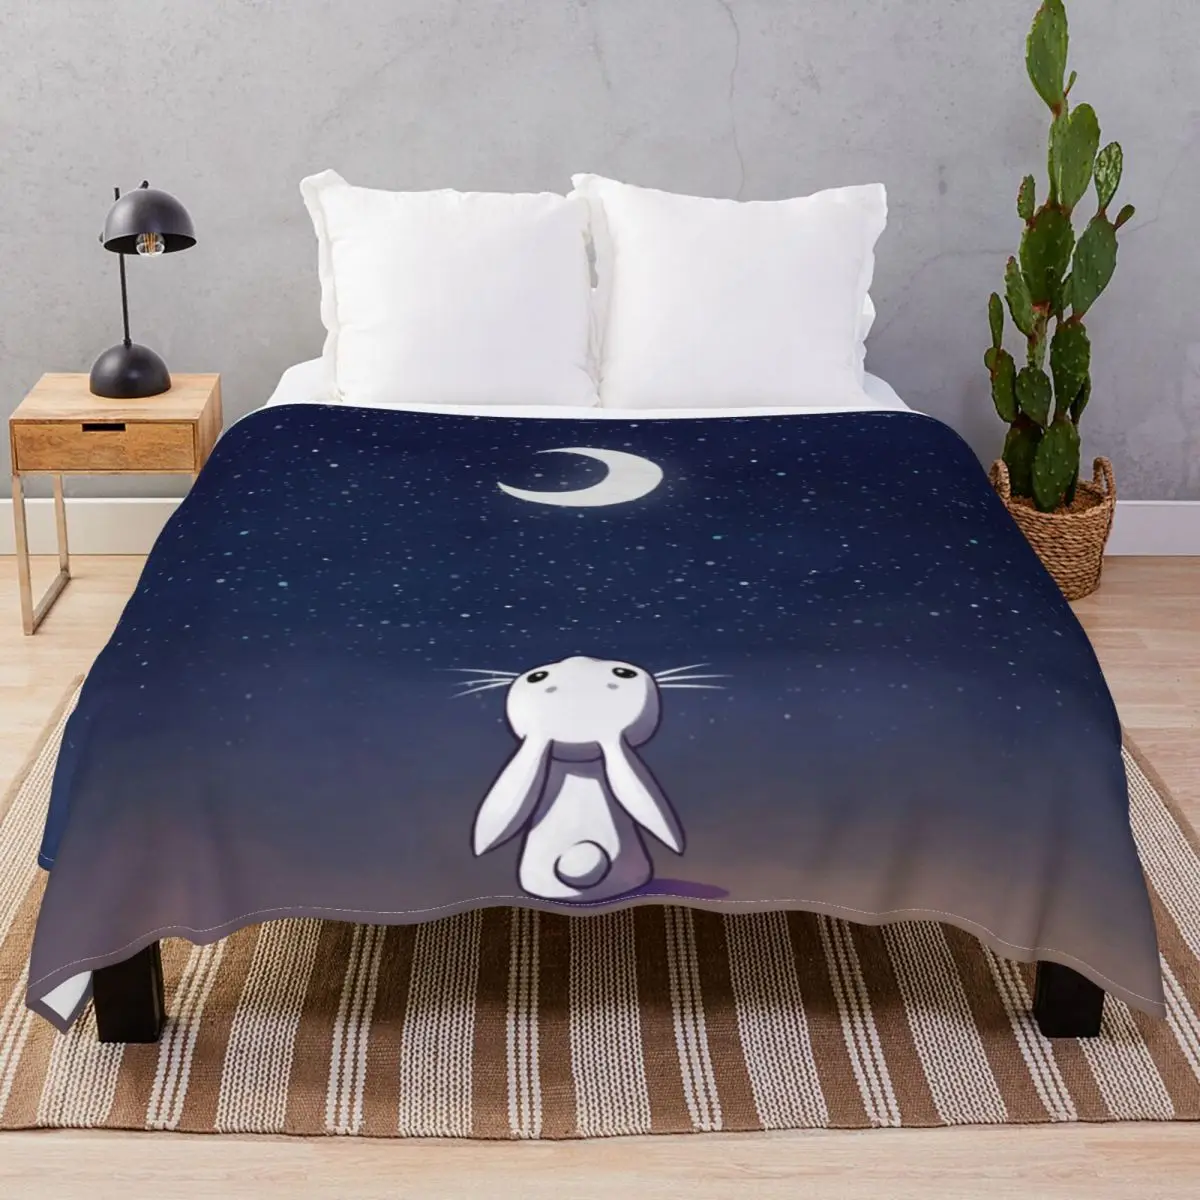 Moon Bunny Blankets Flannel Spring Autumn Lightweight Thin Throw Blanket for Bed Sofa Travel Cinema